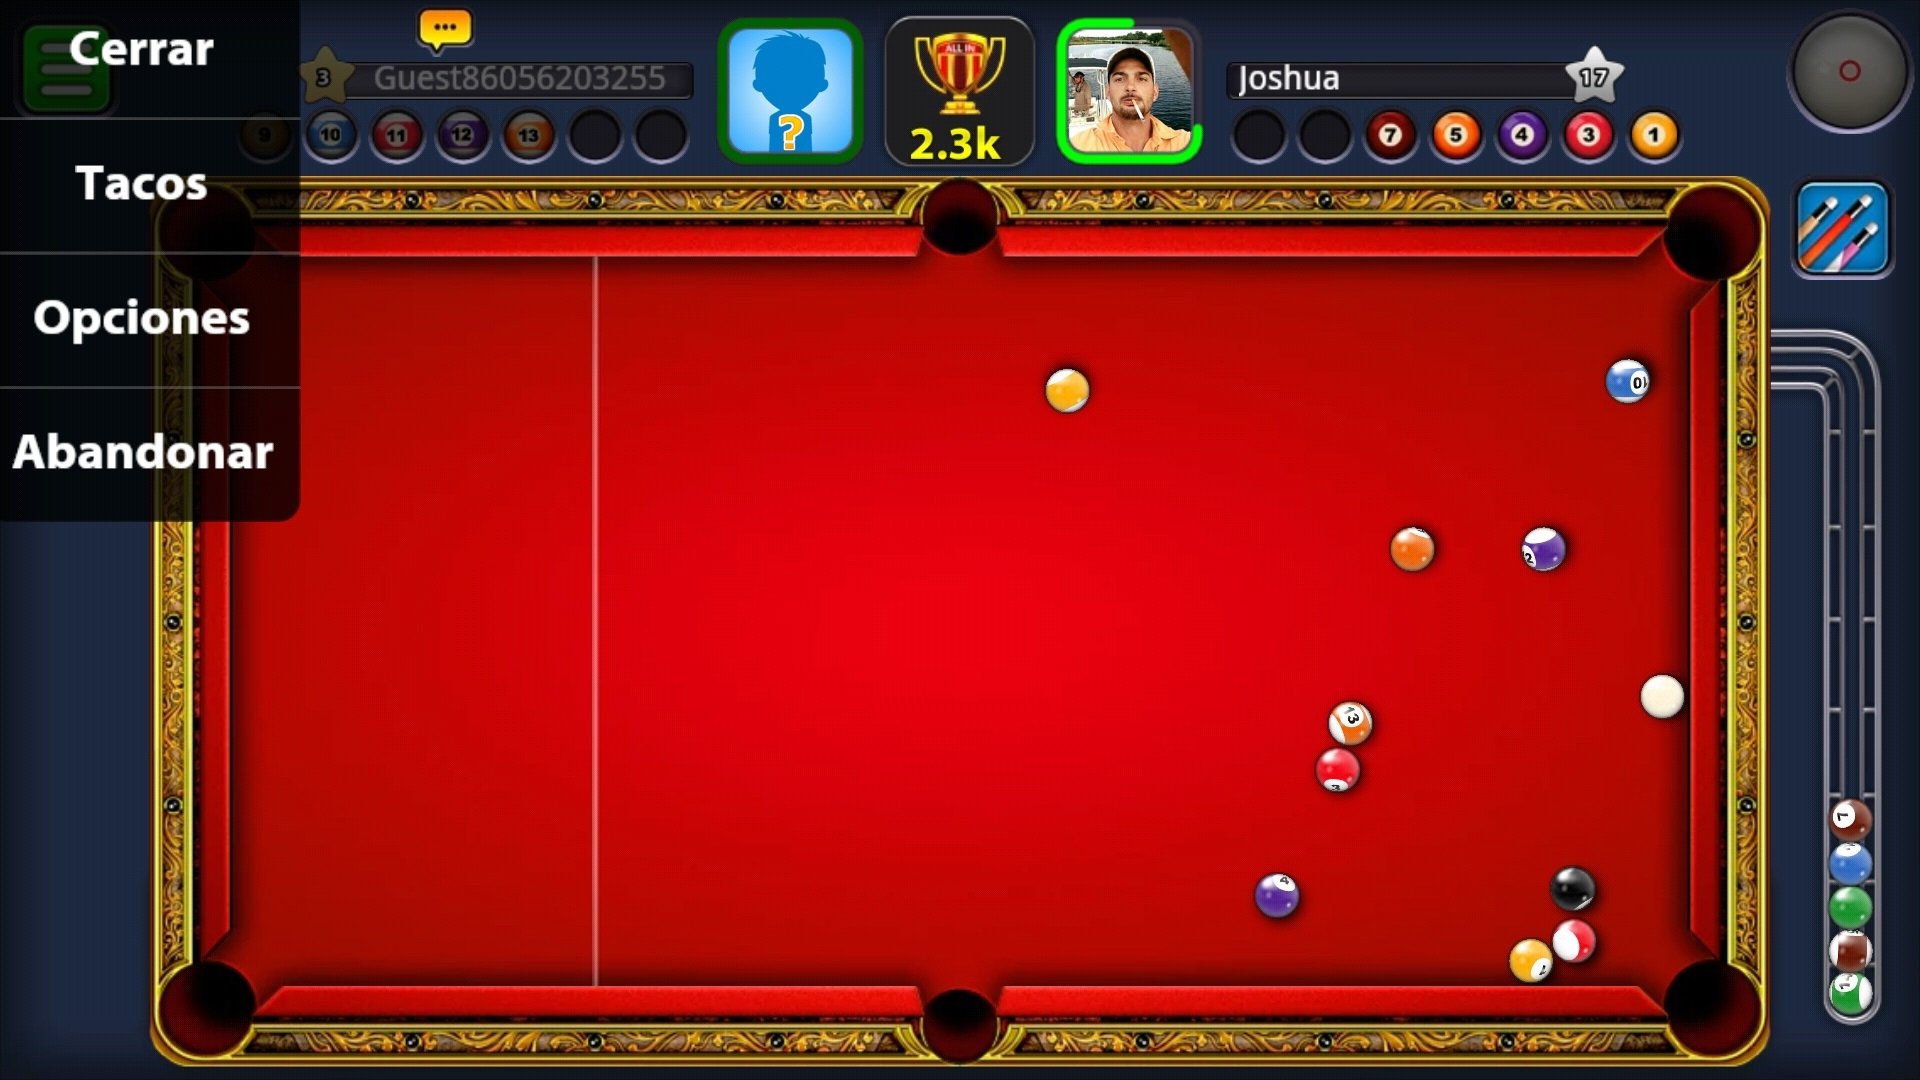 8 Ball Pool 4.5.2 - Download fÃ¼r Android APK Kostenlos - 